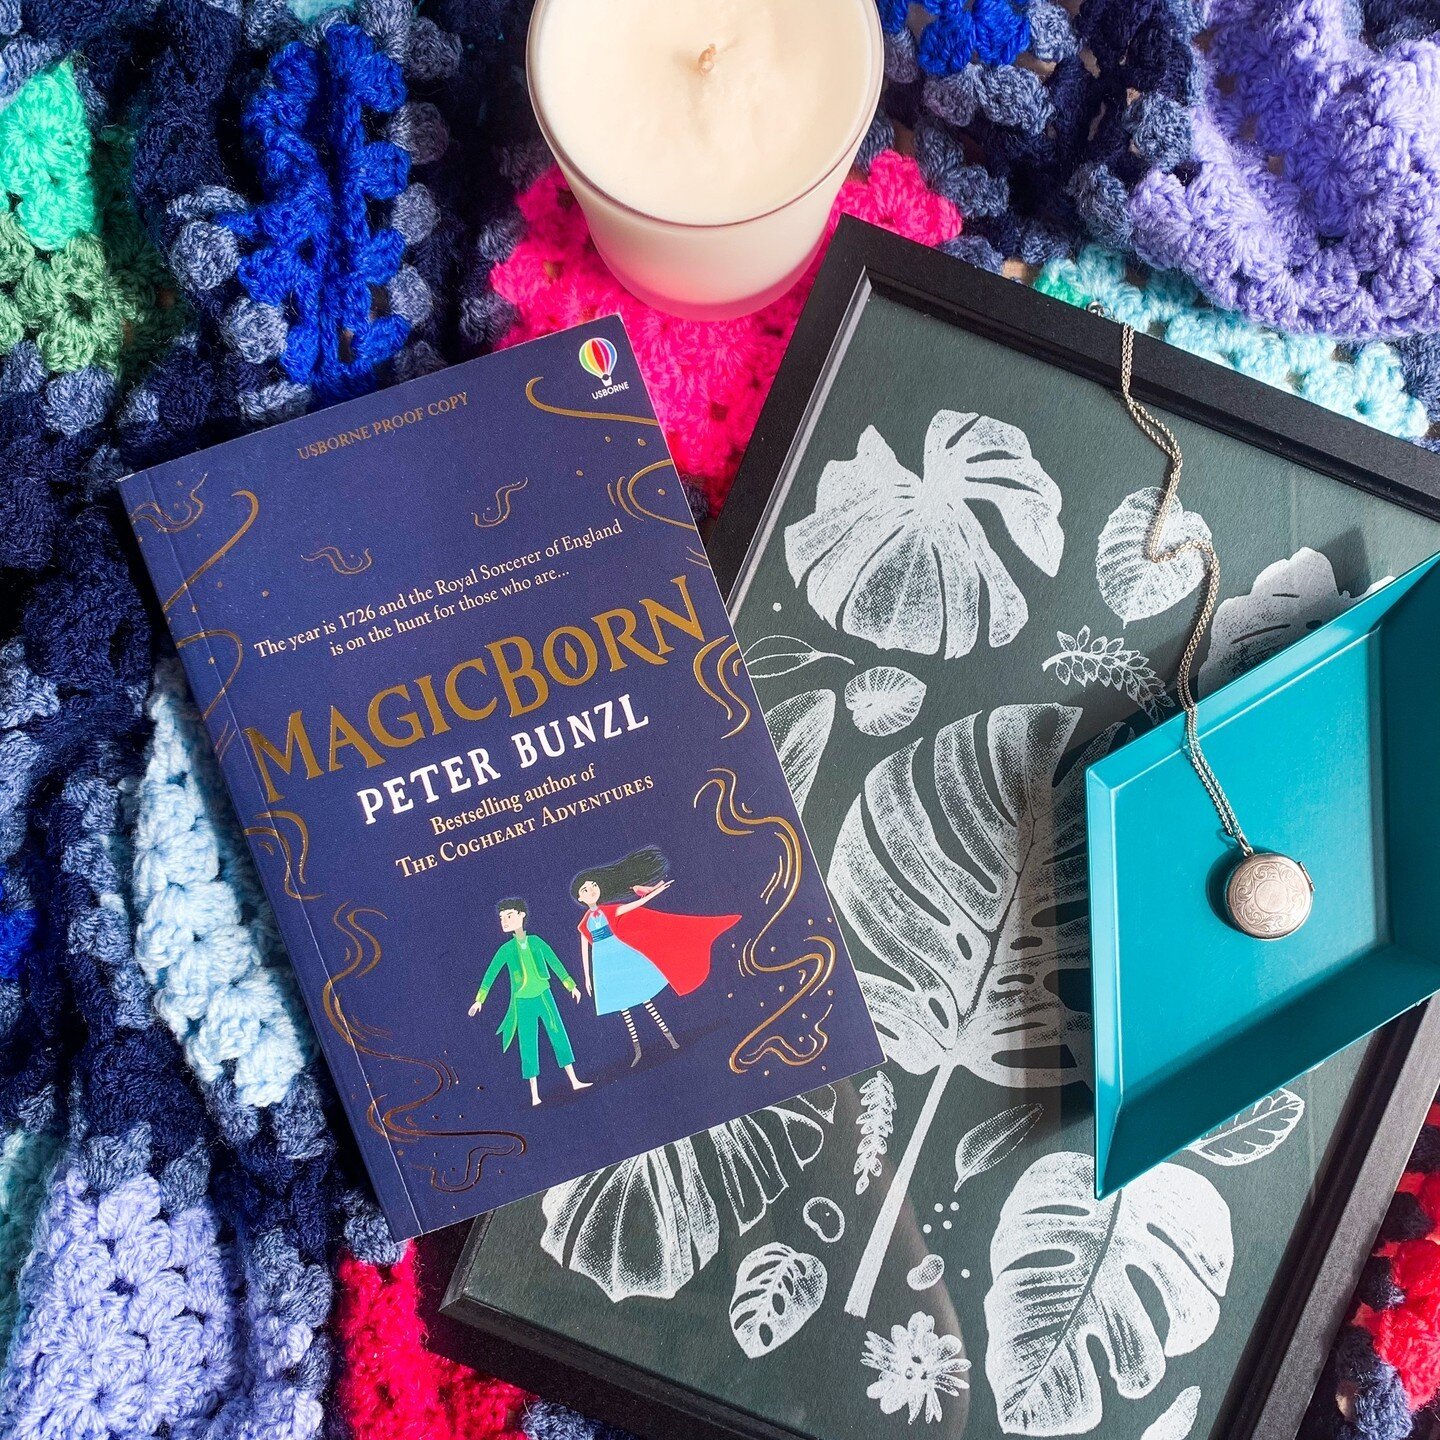 The curse is changed. You&rsquo;ll never know. The truth is lost.⁠
The lie will grow... 💫⁠
⁠
We&rsquo;ve got an incredible fantasy readalong kicking off on⁠
Thursday 2nd June for Magicborn by @peter.bunzel, and we⁠
invite you to join us on the adven